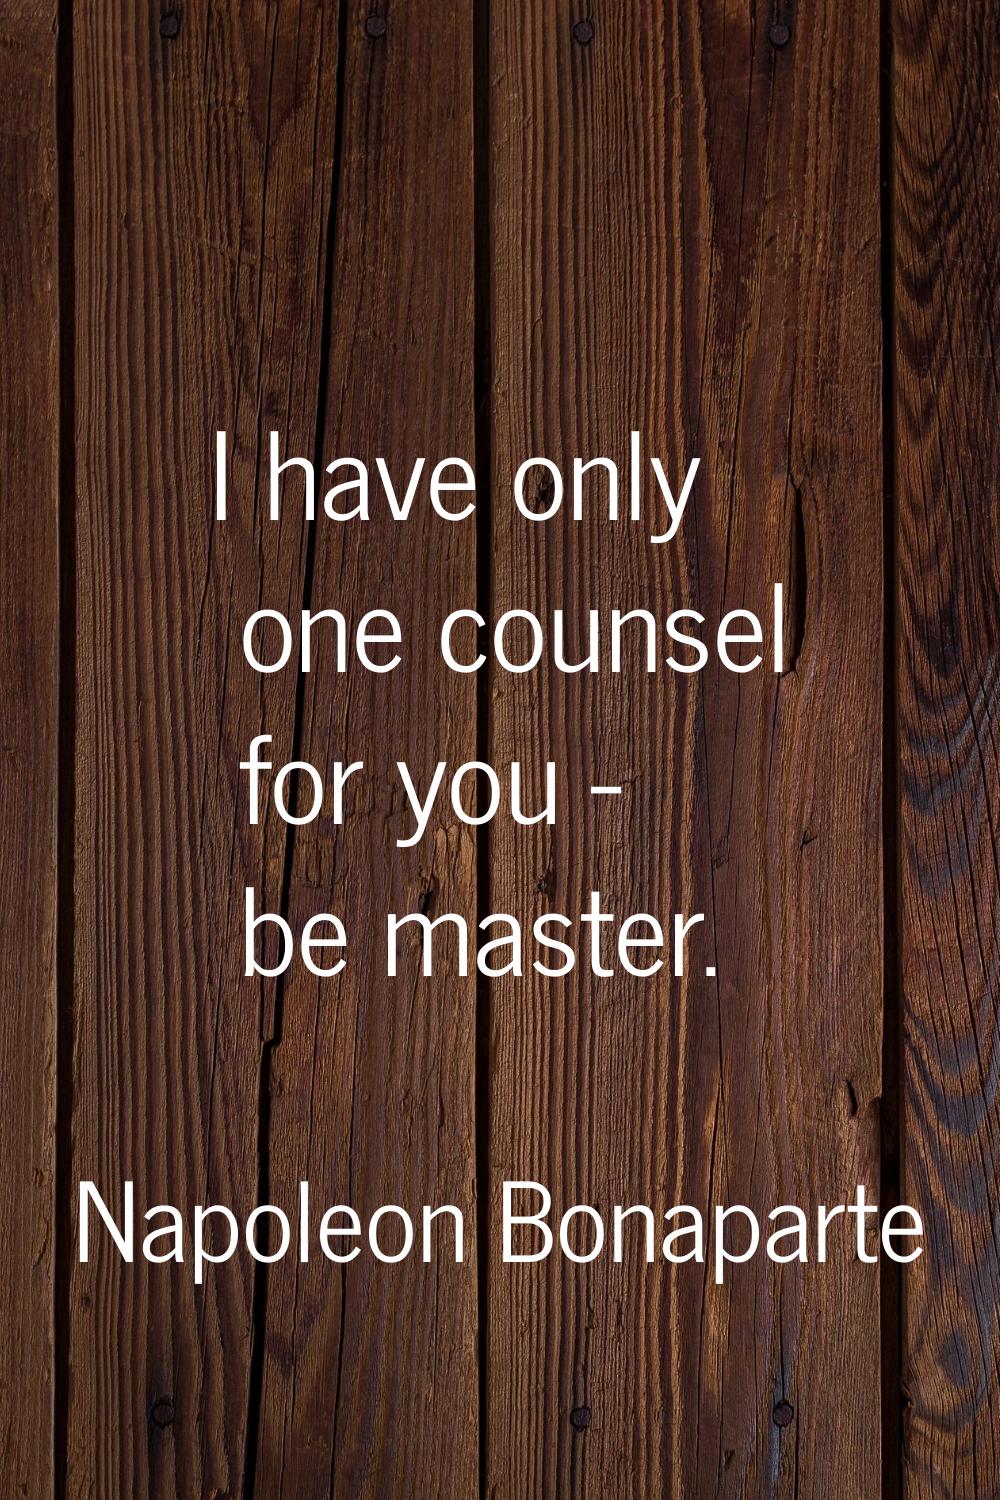 I have only one counsel for you - be master.